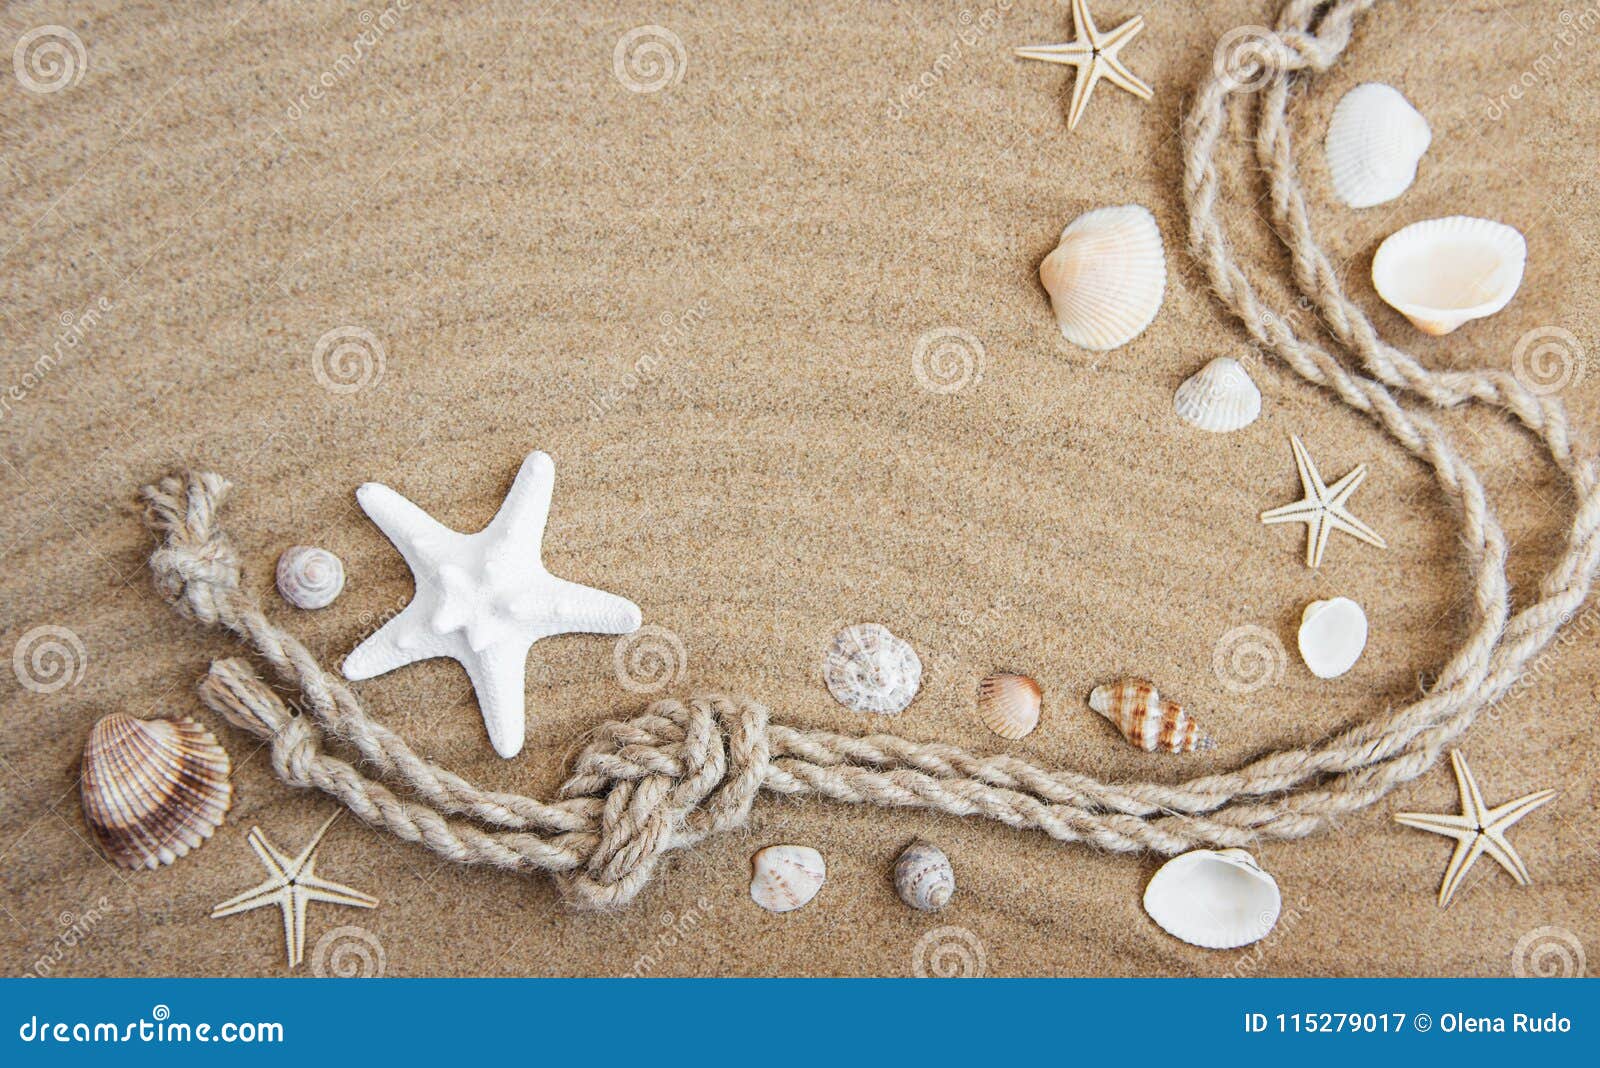 Seashells and Sea Decorations with Rope Stock Image - Image of